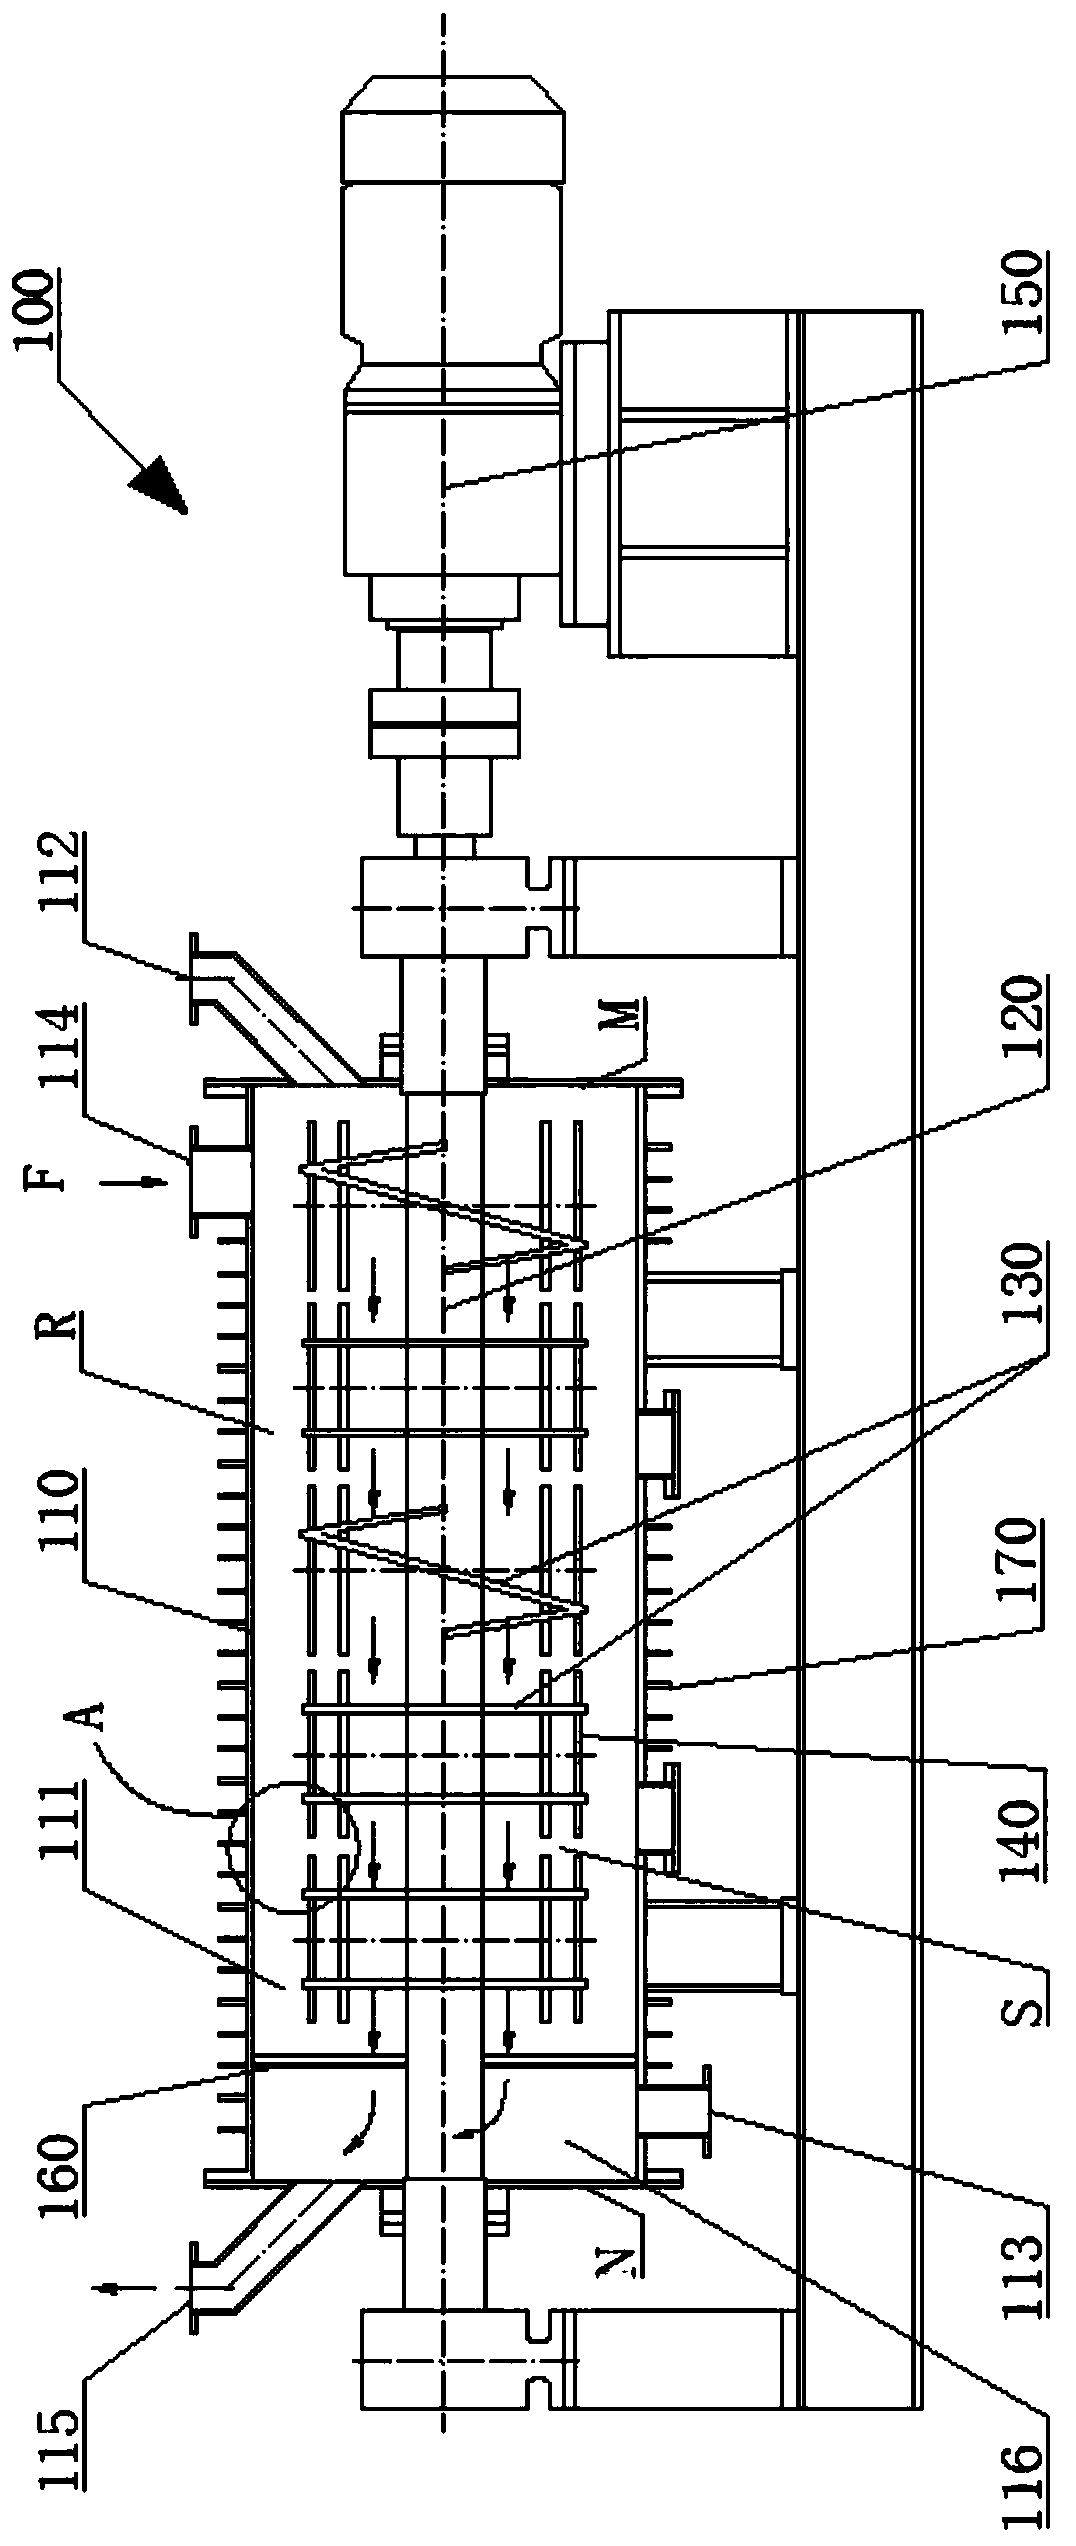 Cement clinker grinding implementation device capable of continuously producing